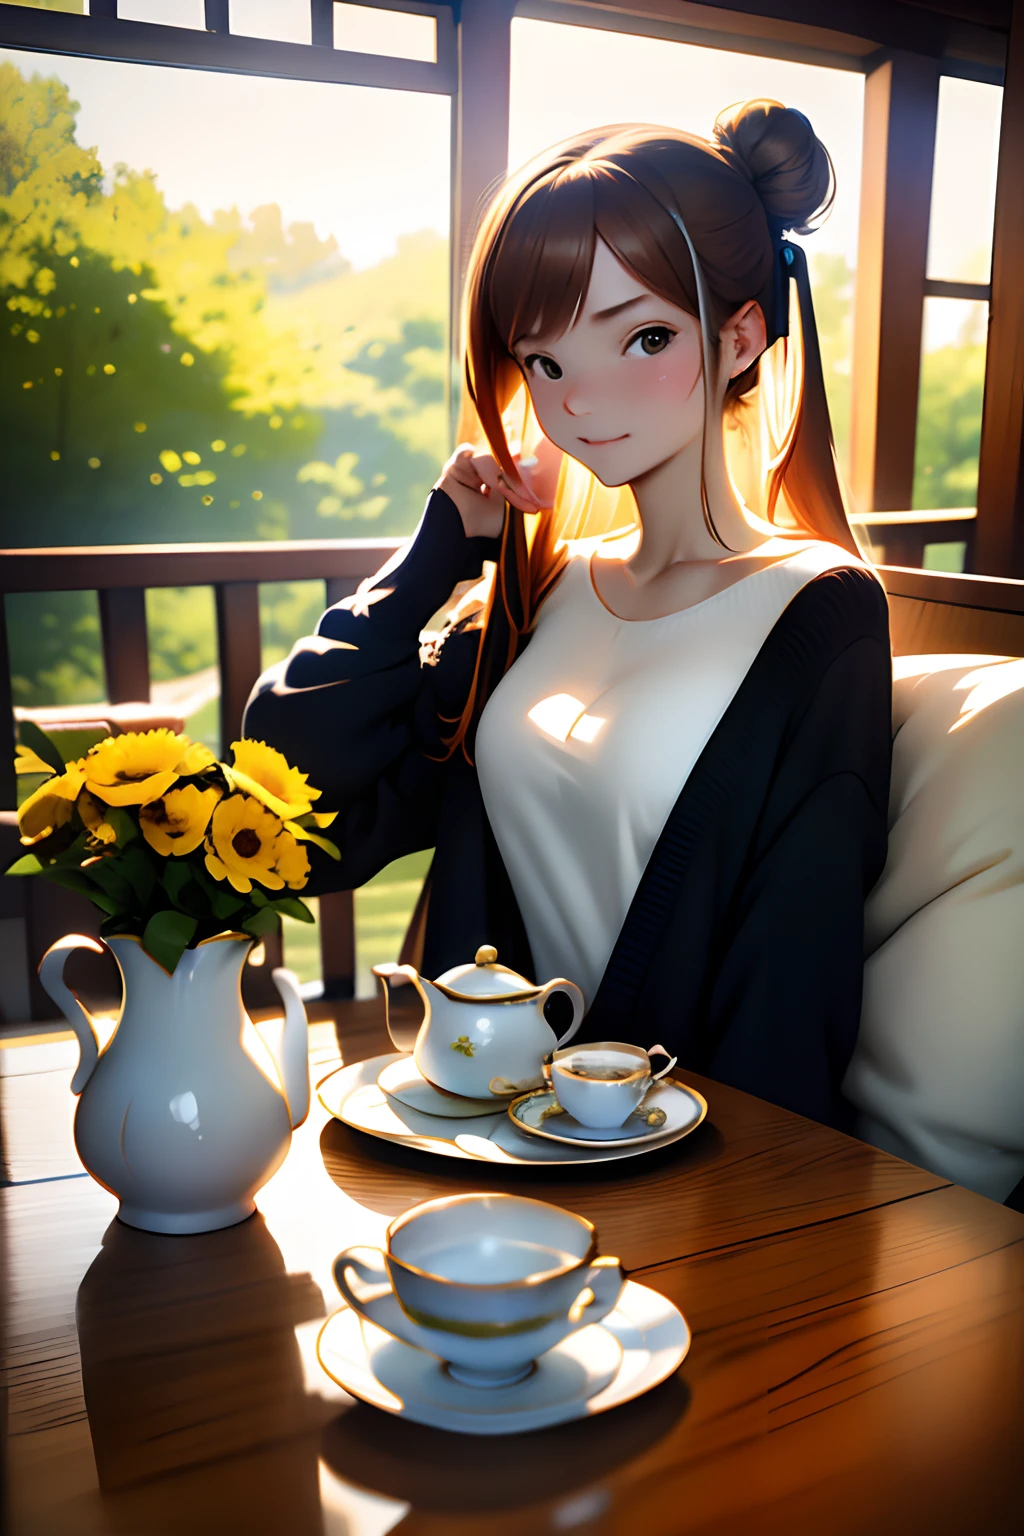 masutepiece, Best Quality, hight resolution,A perfect･Atomy,solo,Brown hair,Bun hair in one bun,white  shirt,Cardigan with long ultramarine sleeves,Enjoy afternoon tea and tea treats,Tea set,Round table with flowers in a vase,